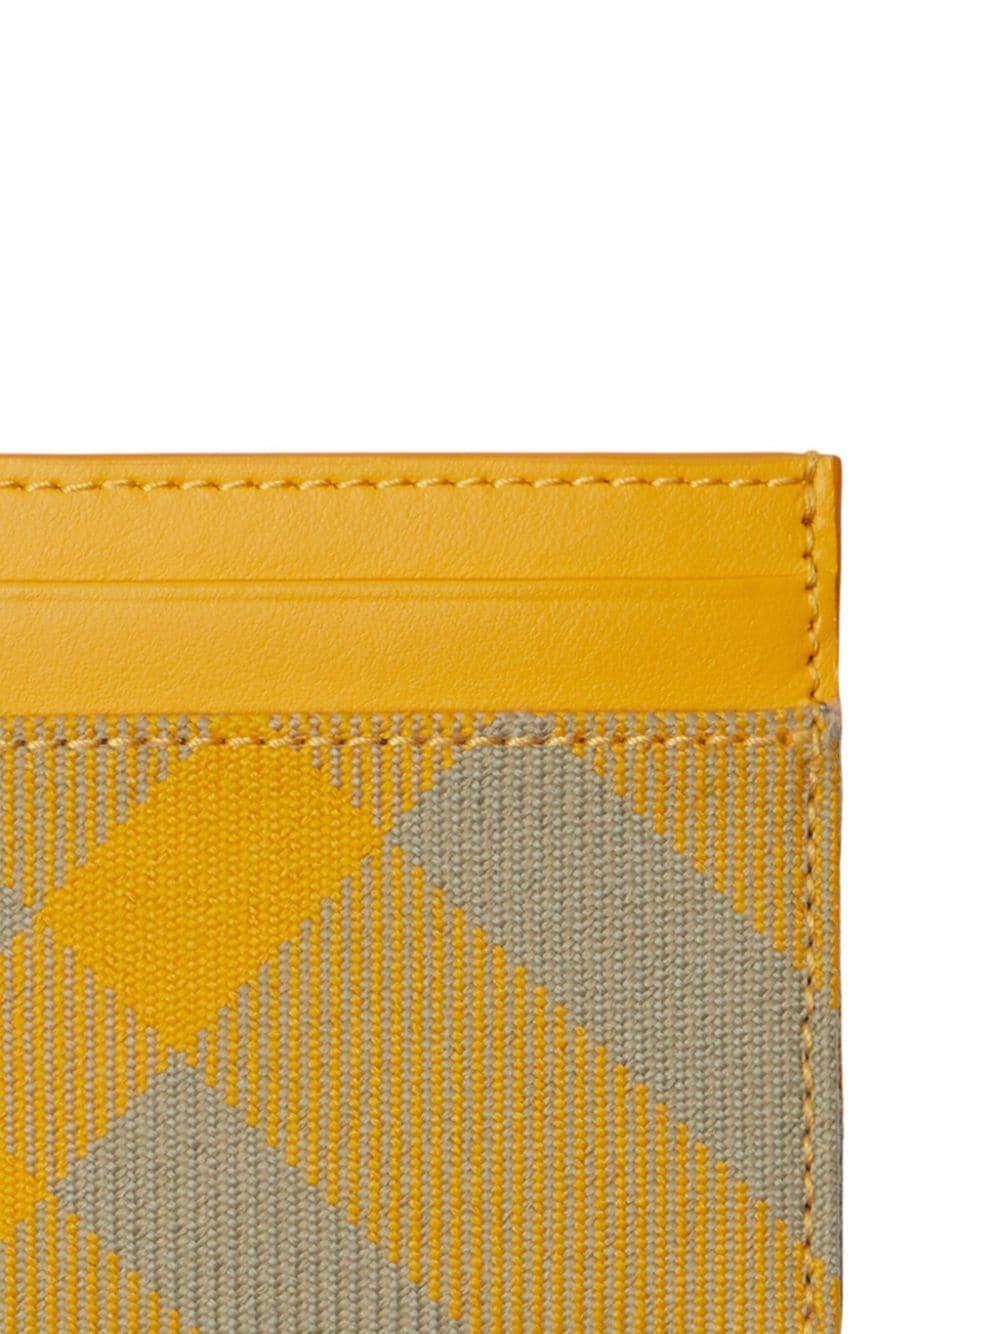 Burberry checked leather cardholder - Neutrals